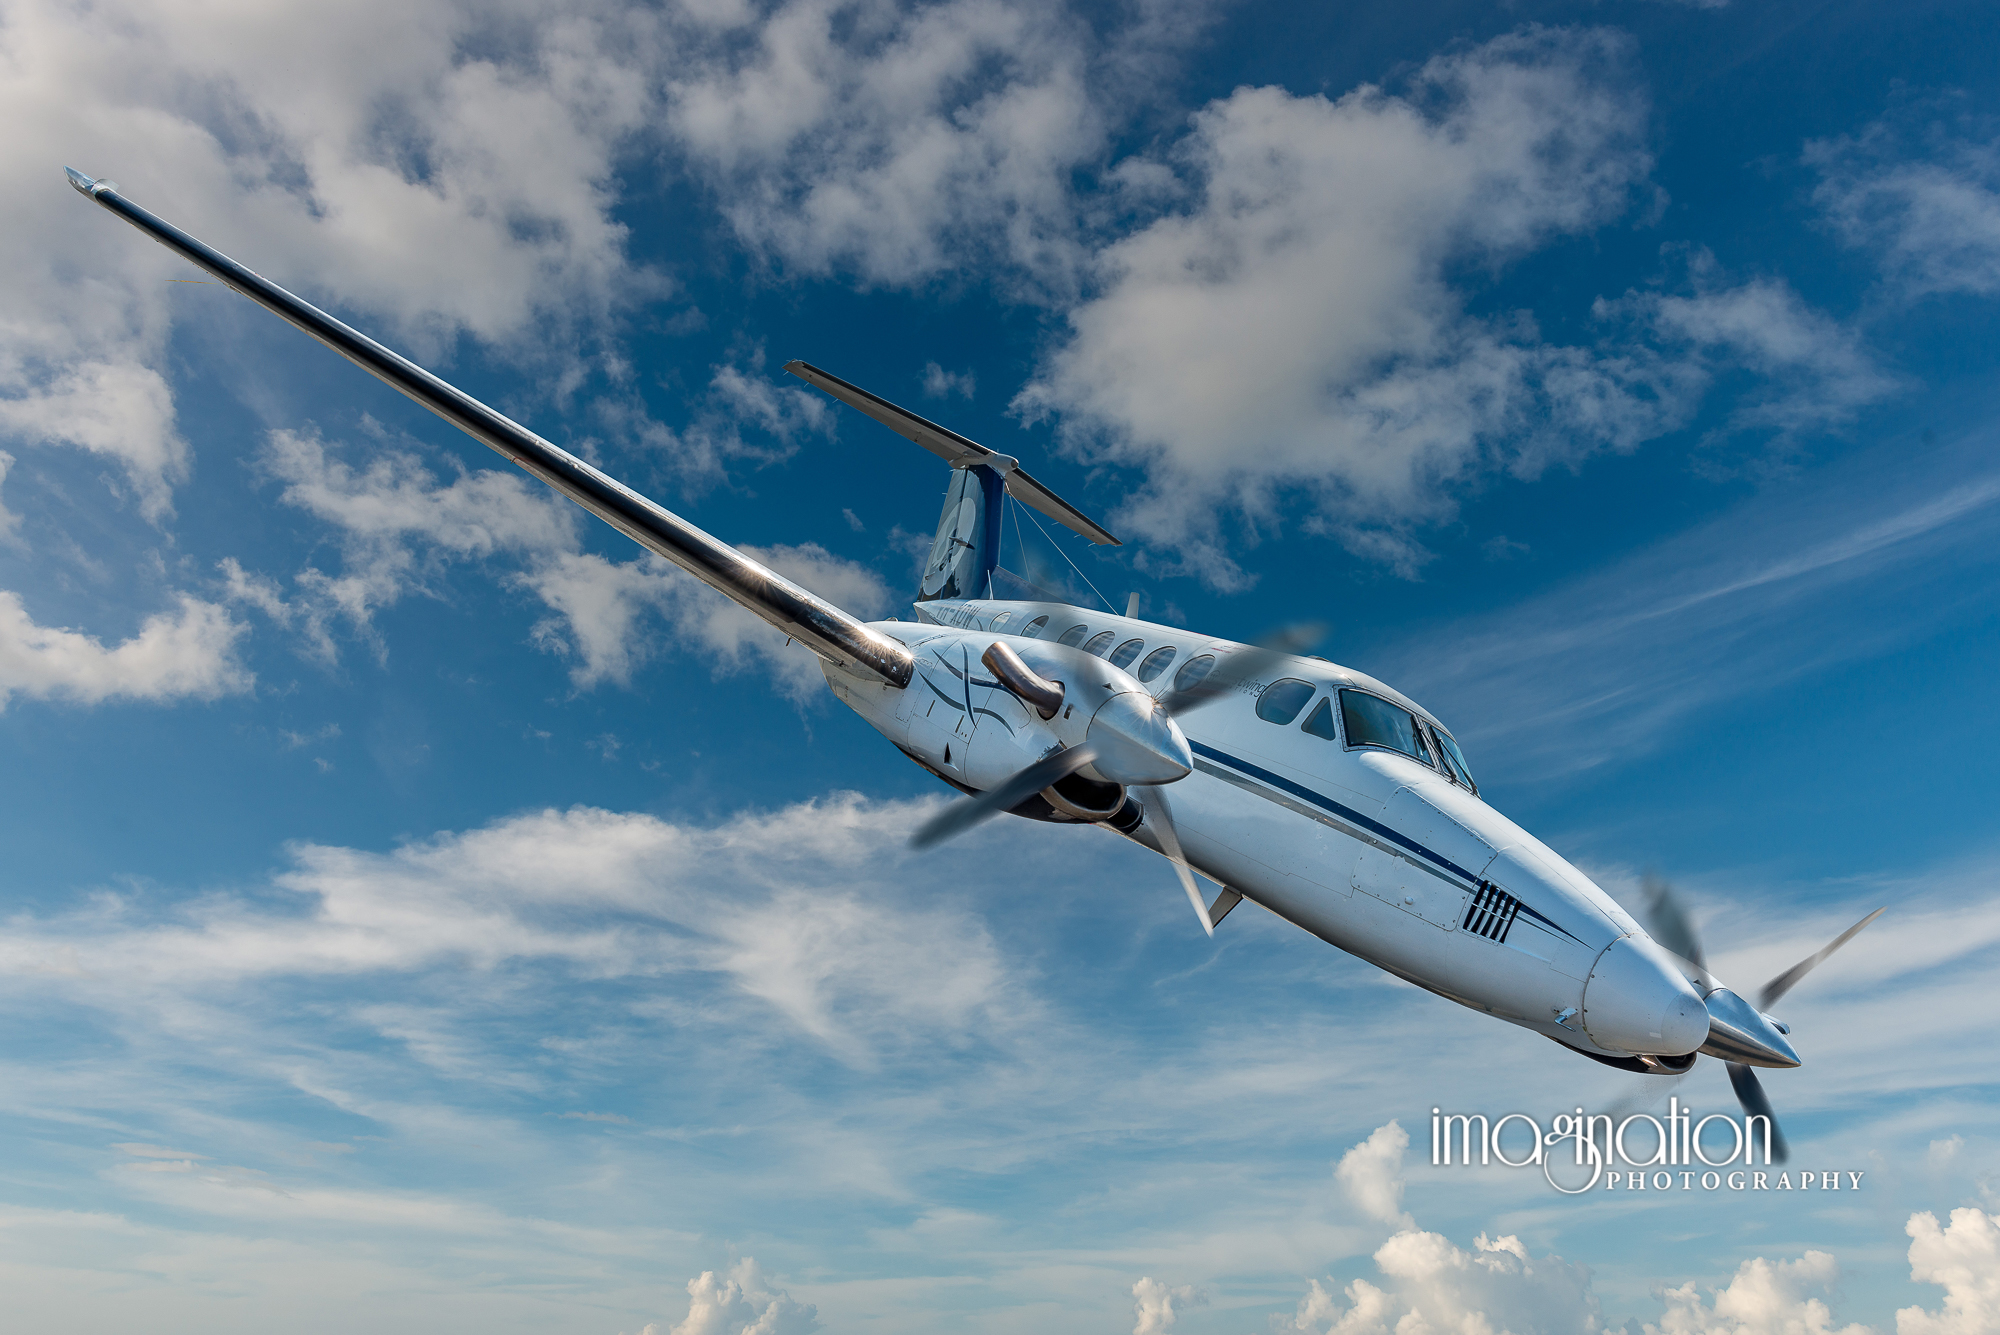 Beechcraft Super King Air aeroplane for sale at Cairns Airport by Nextant  Pacific Pty Limited | Imagination Photography